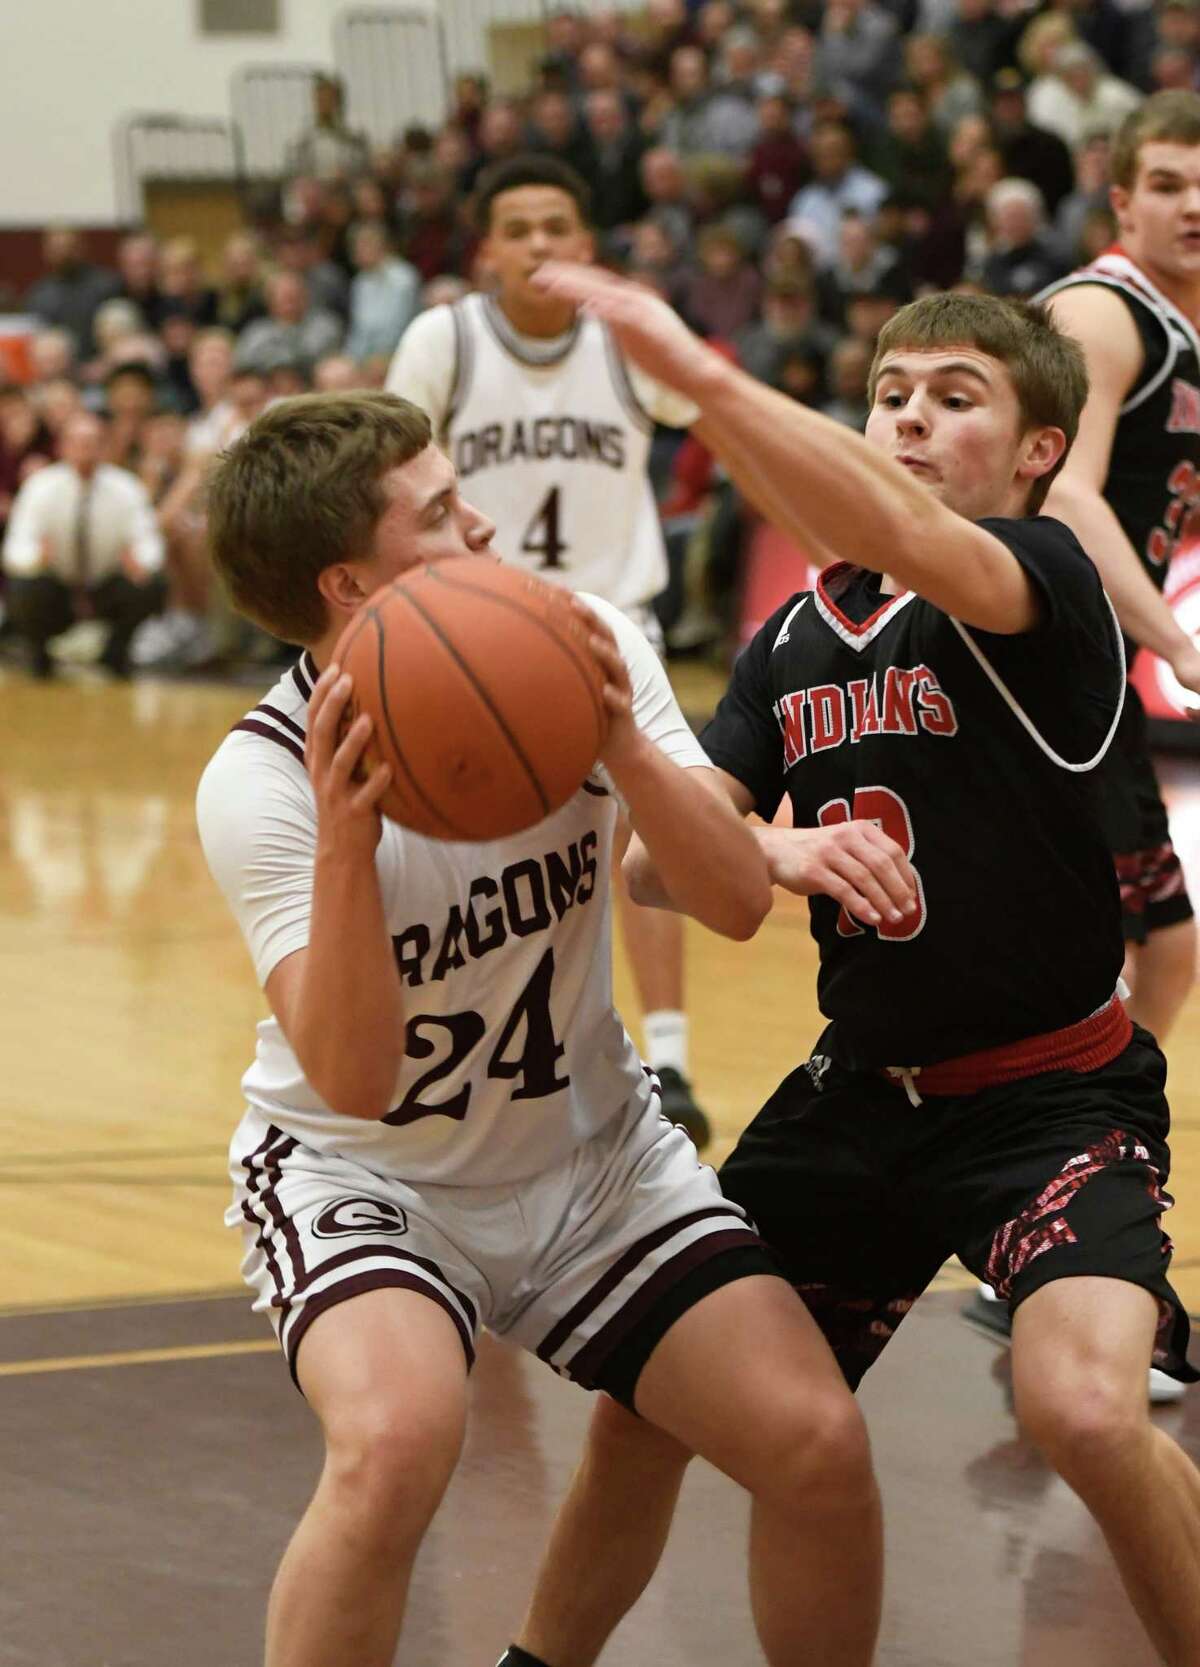 Glens Falls's Trent Girard guards Gloversville's Anderson Jones during a game on Monday, Feb. 11, 2019, at the high school in Gloversville, N.Y. (Jenn March, Special to the Times Union)